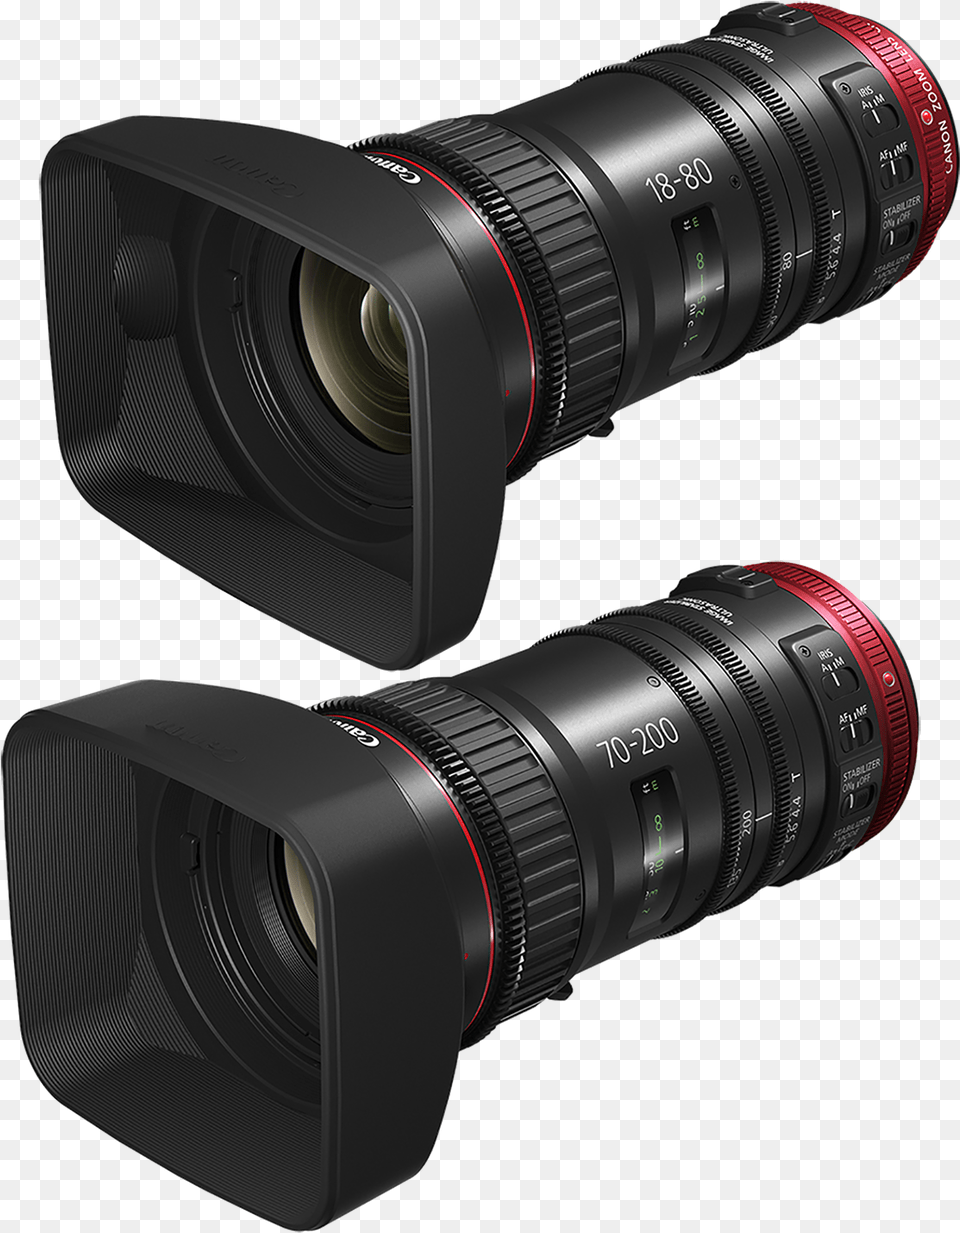 New Compact Servo Is Cine Zoom Package Added Canon Cn E 70, Camera, Electronics, Camera Lens, Video Camera Free Png Download